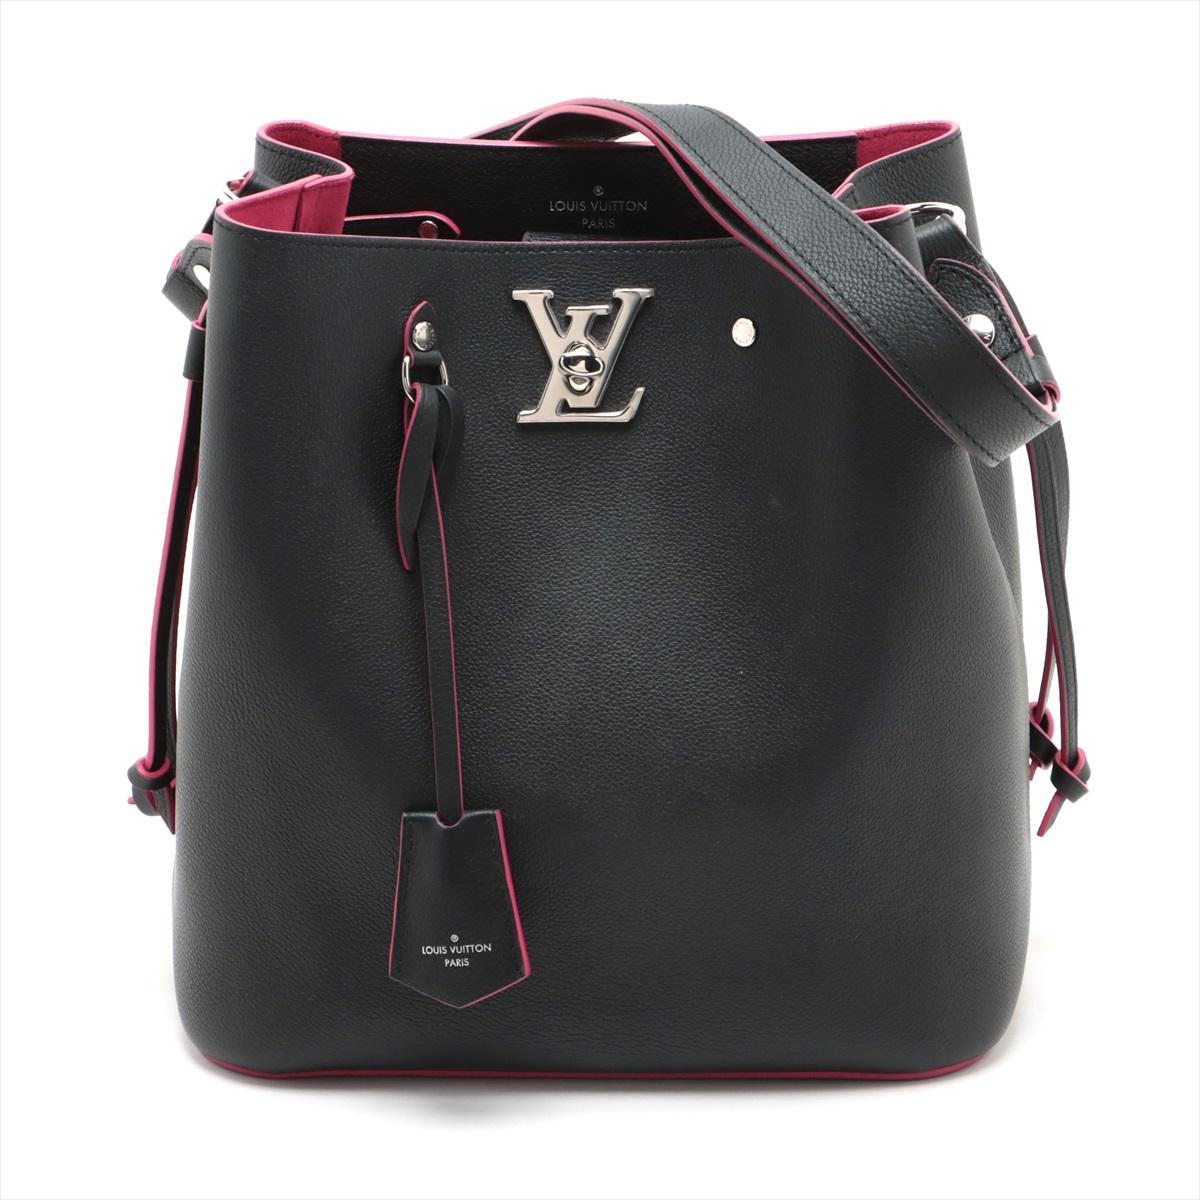 The Louis Vuitton LV Logo Lockme Bucket Shoulder Bag in Black and Fuchsia a stylish and contemporary addition to the Lockme collection that perfectly encapsulates Louis Vuitton's iconic aesthetic. The bucket bag features smooth black leather